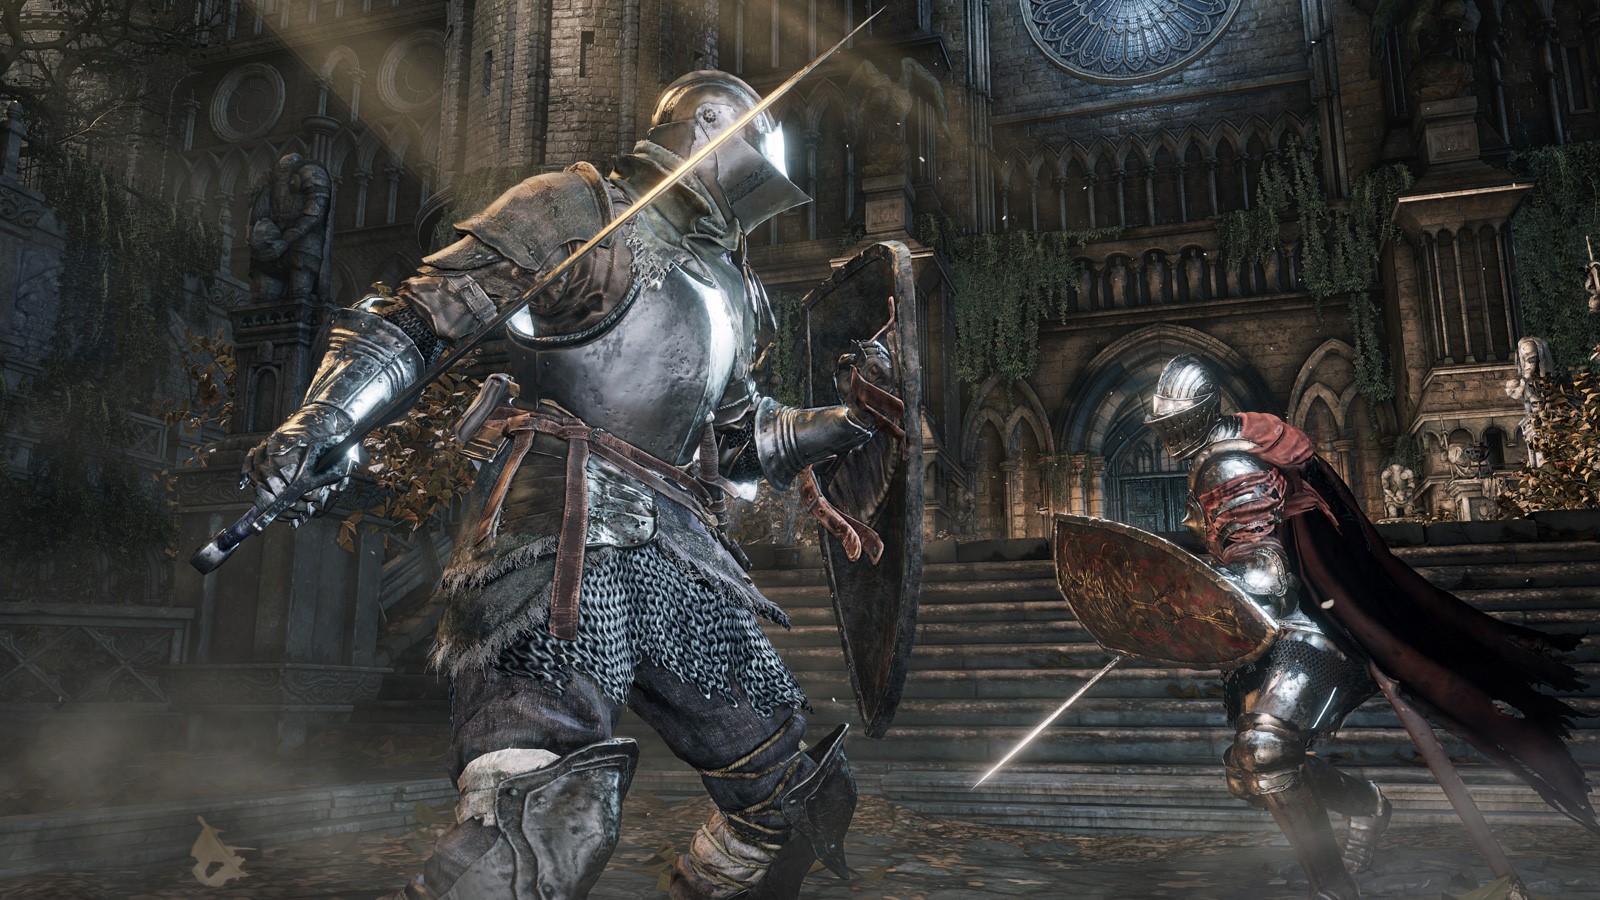 armored being on right fighting giant armored being on left